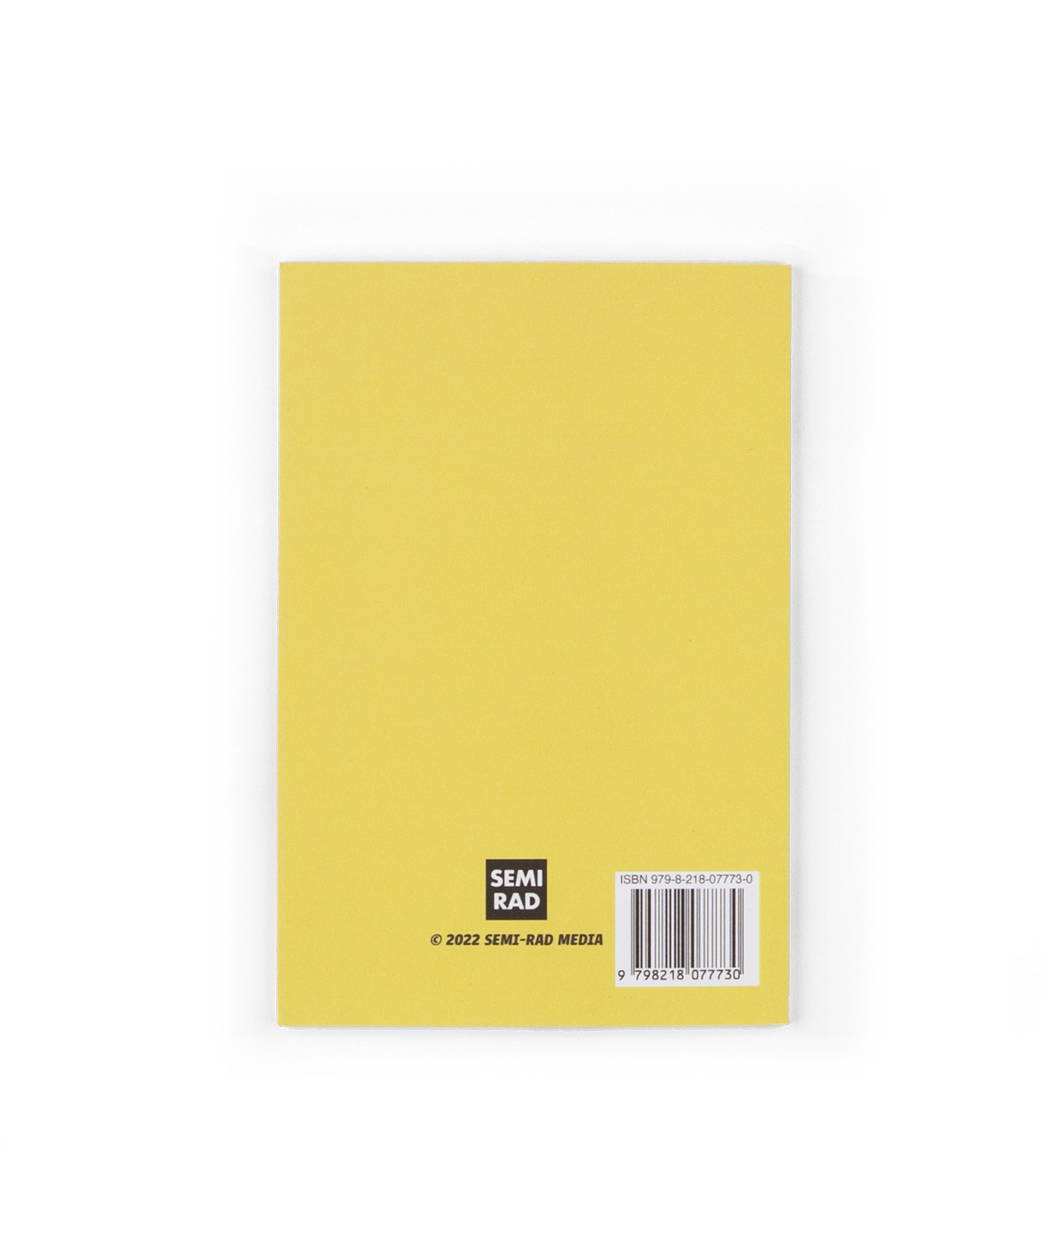 The back of a yellow book with the Semi Rad logo at the bottom and a barcode. 